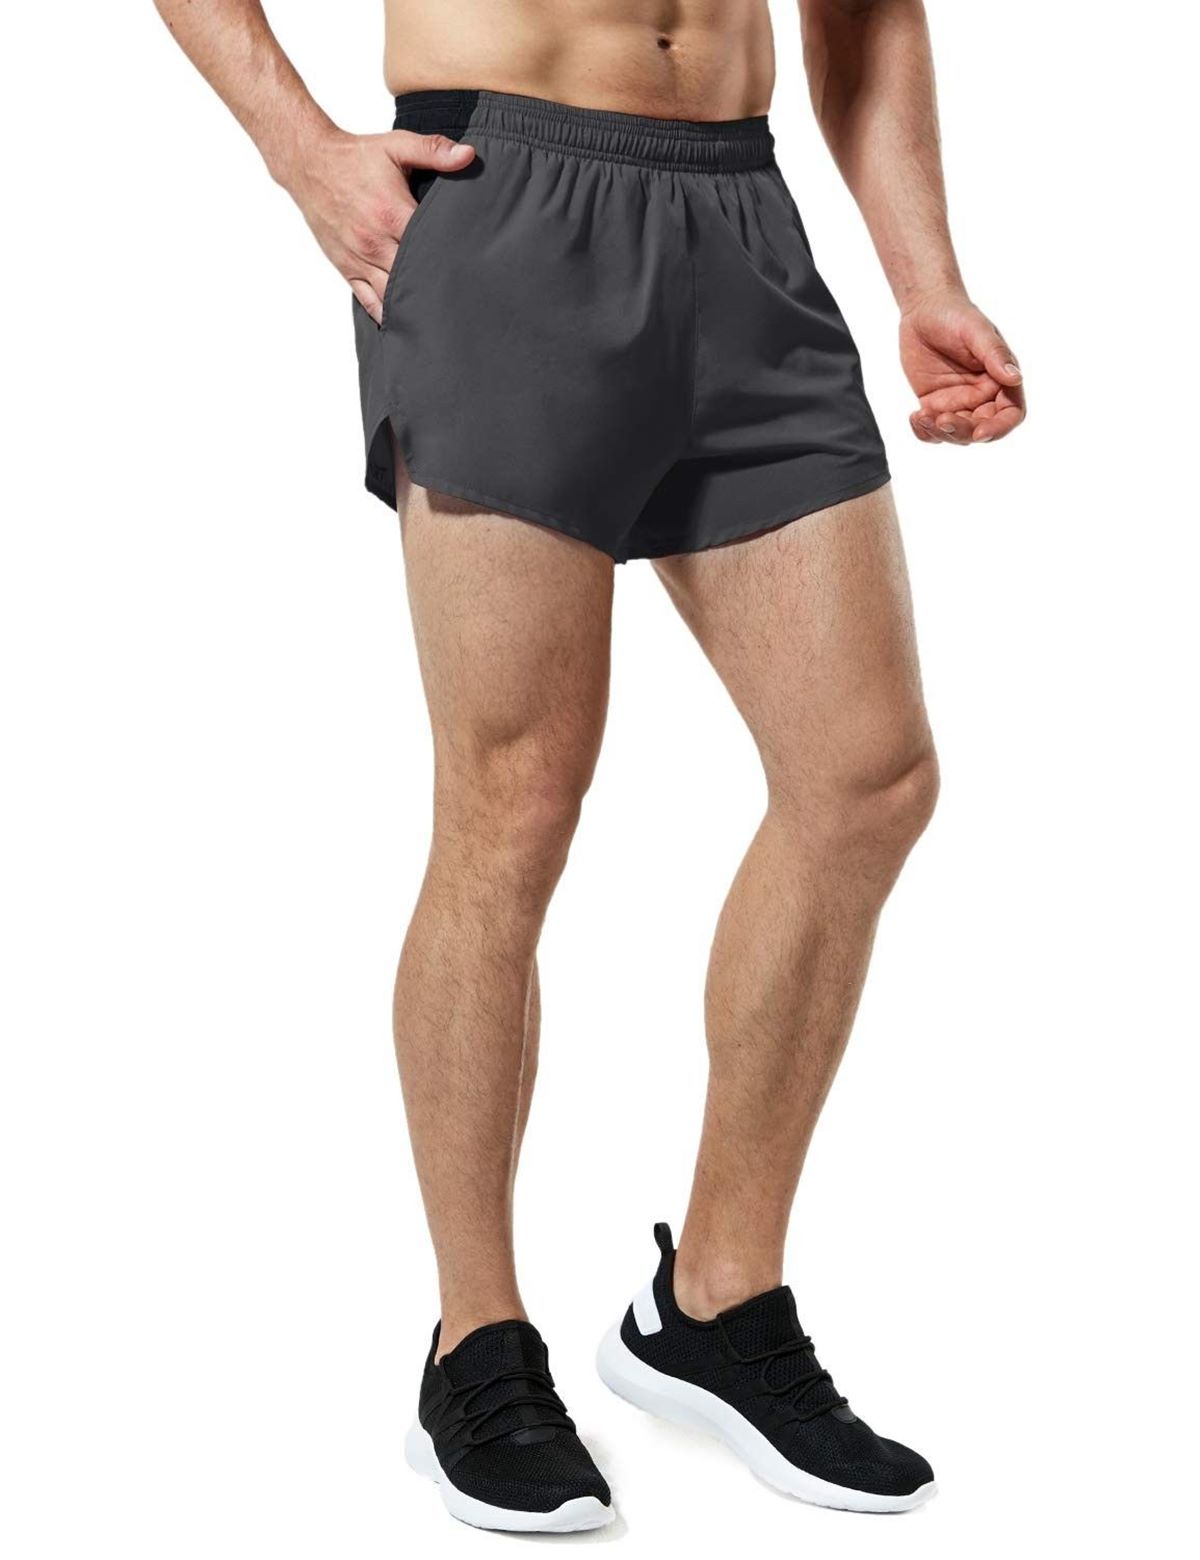 12 Unbelievable Running Shorts With Liner For 2023